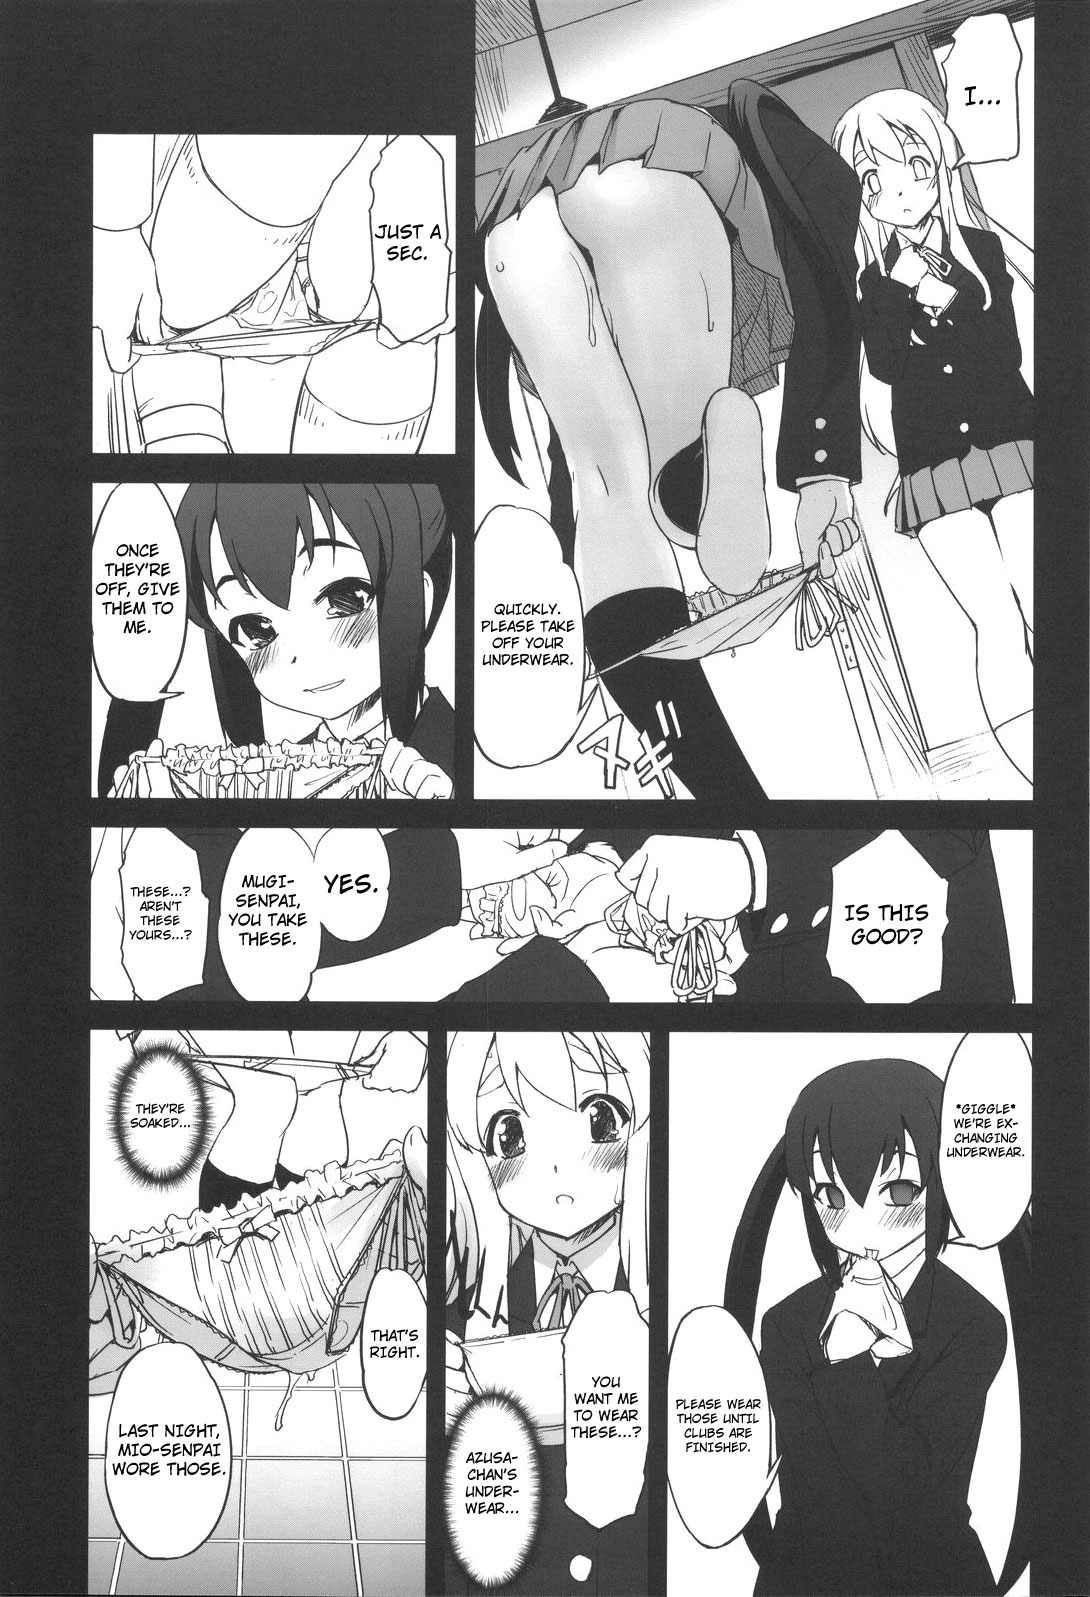 (C76) [G-Power! (Sasayuki)] Nekomimi to Toilet to Houkago no Bushitsu | Cat Ears And A Restroom And The Club Room After School (K-ON) [English] [Nicchiscans-4Dawgz] 17